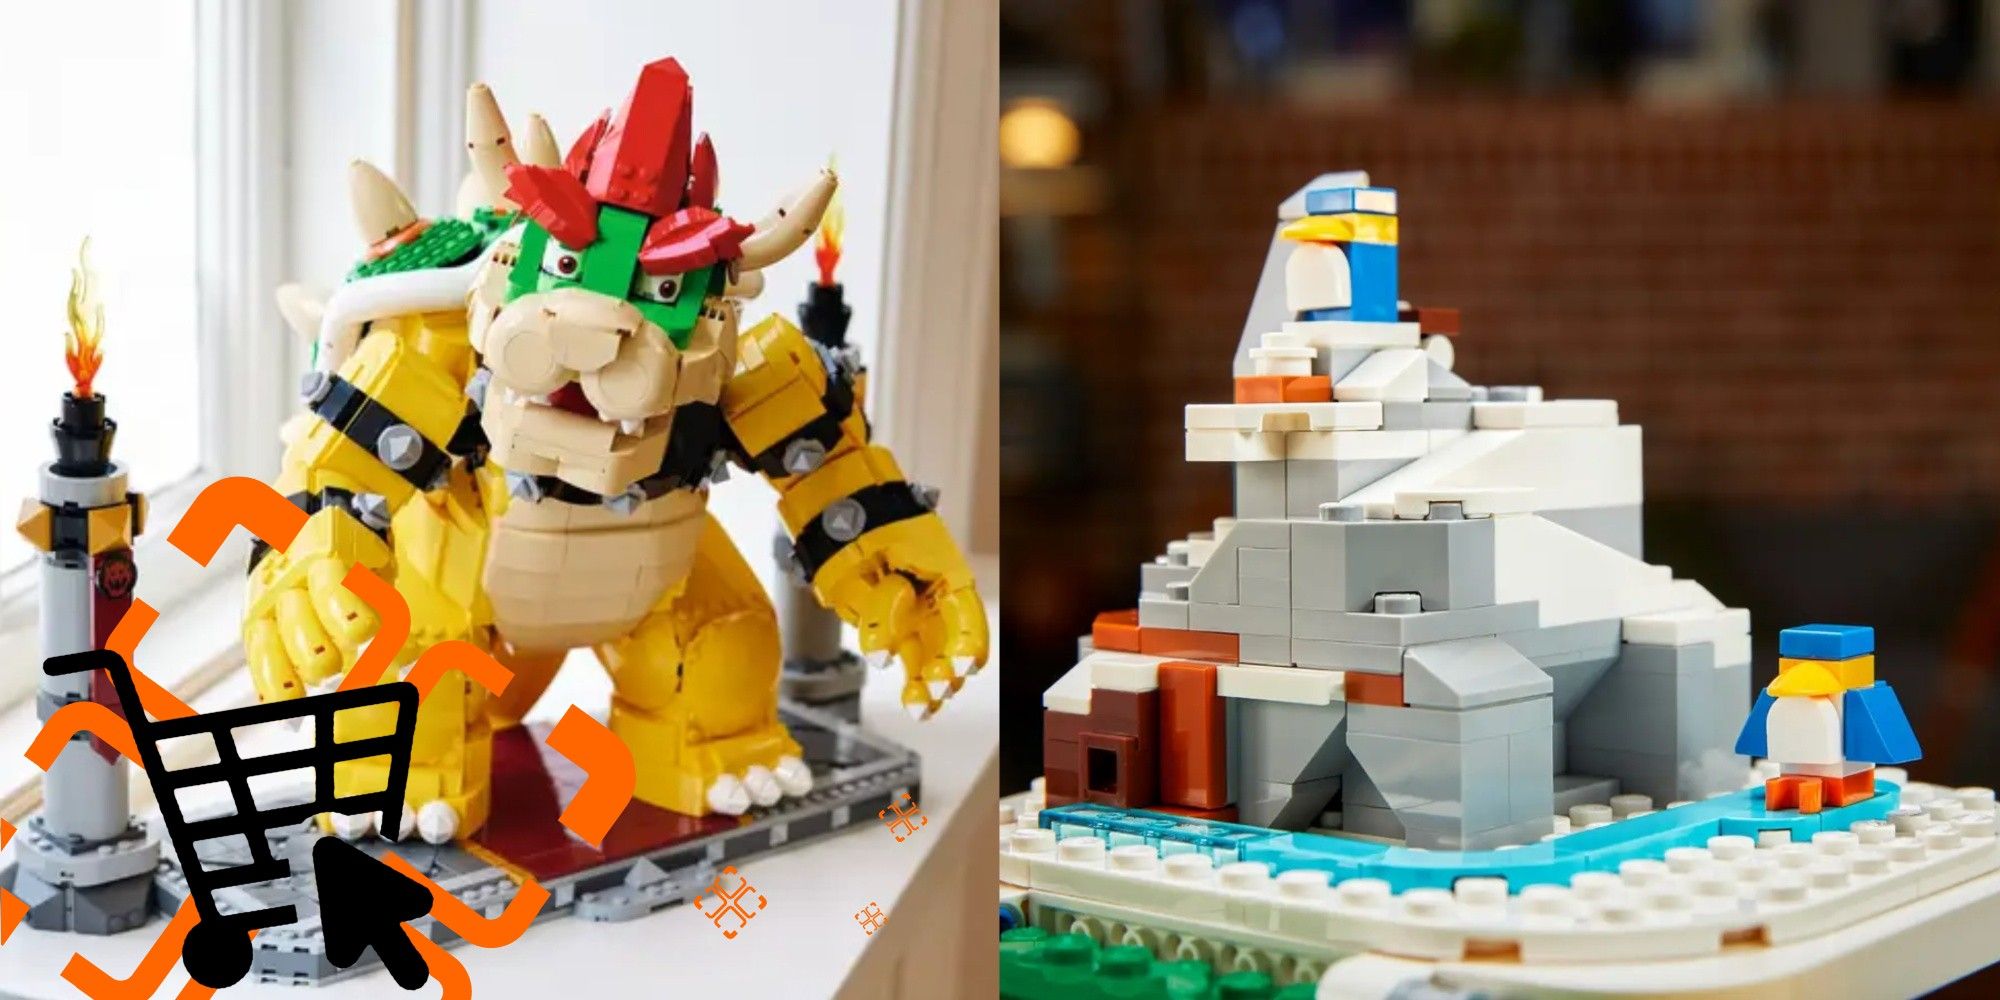 lego bowser and a lego super mario 64 level with a TG buyer's guide overlay